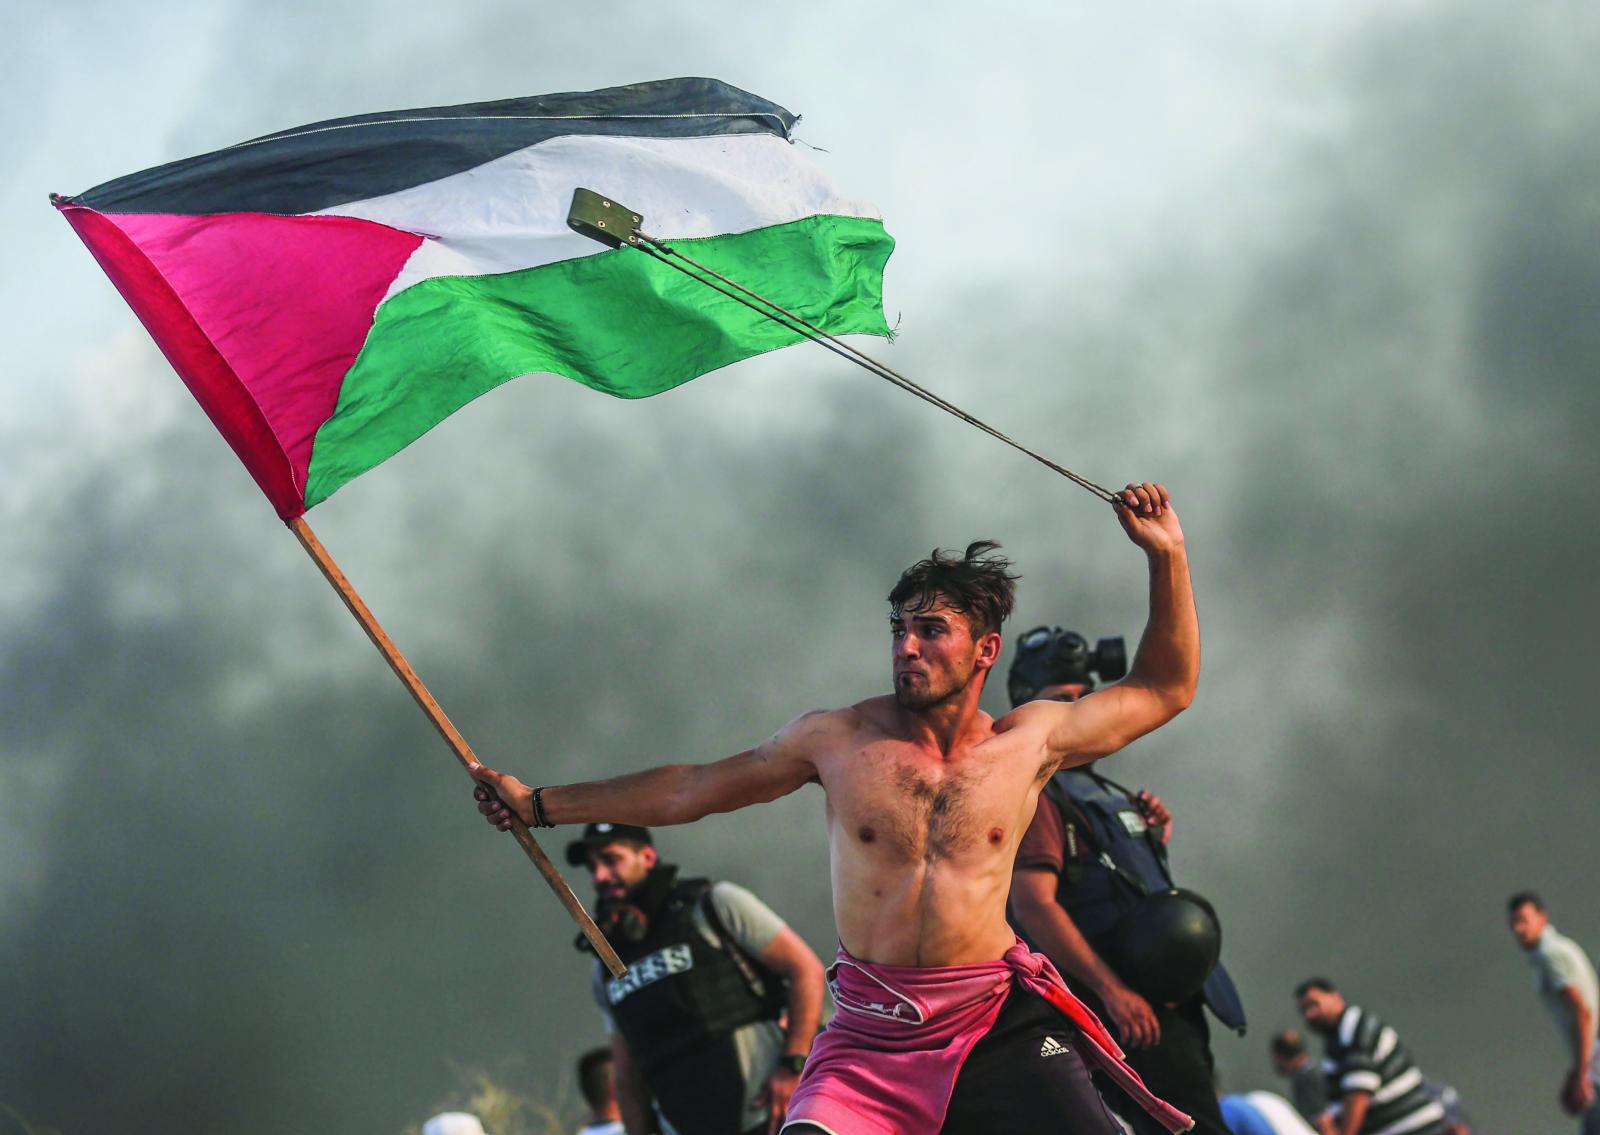 a shirtless young protester in ... Israel for 12 years until now.